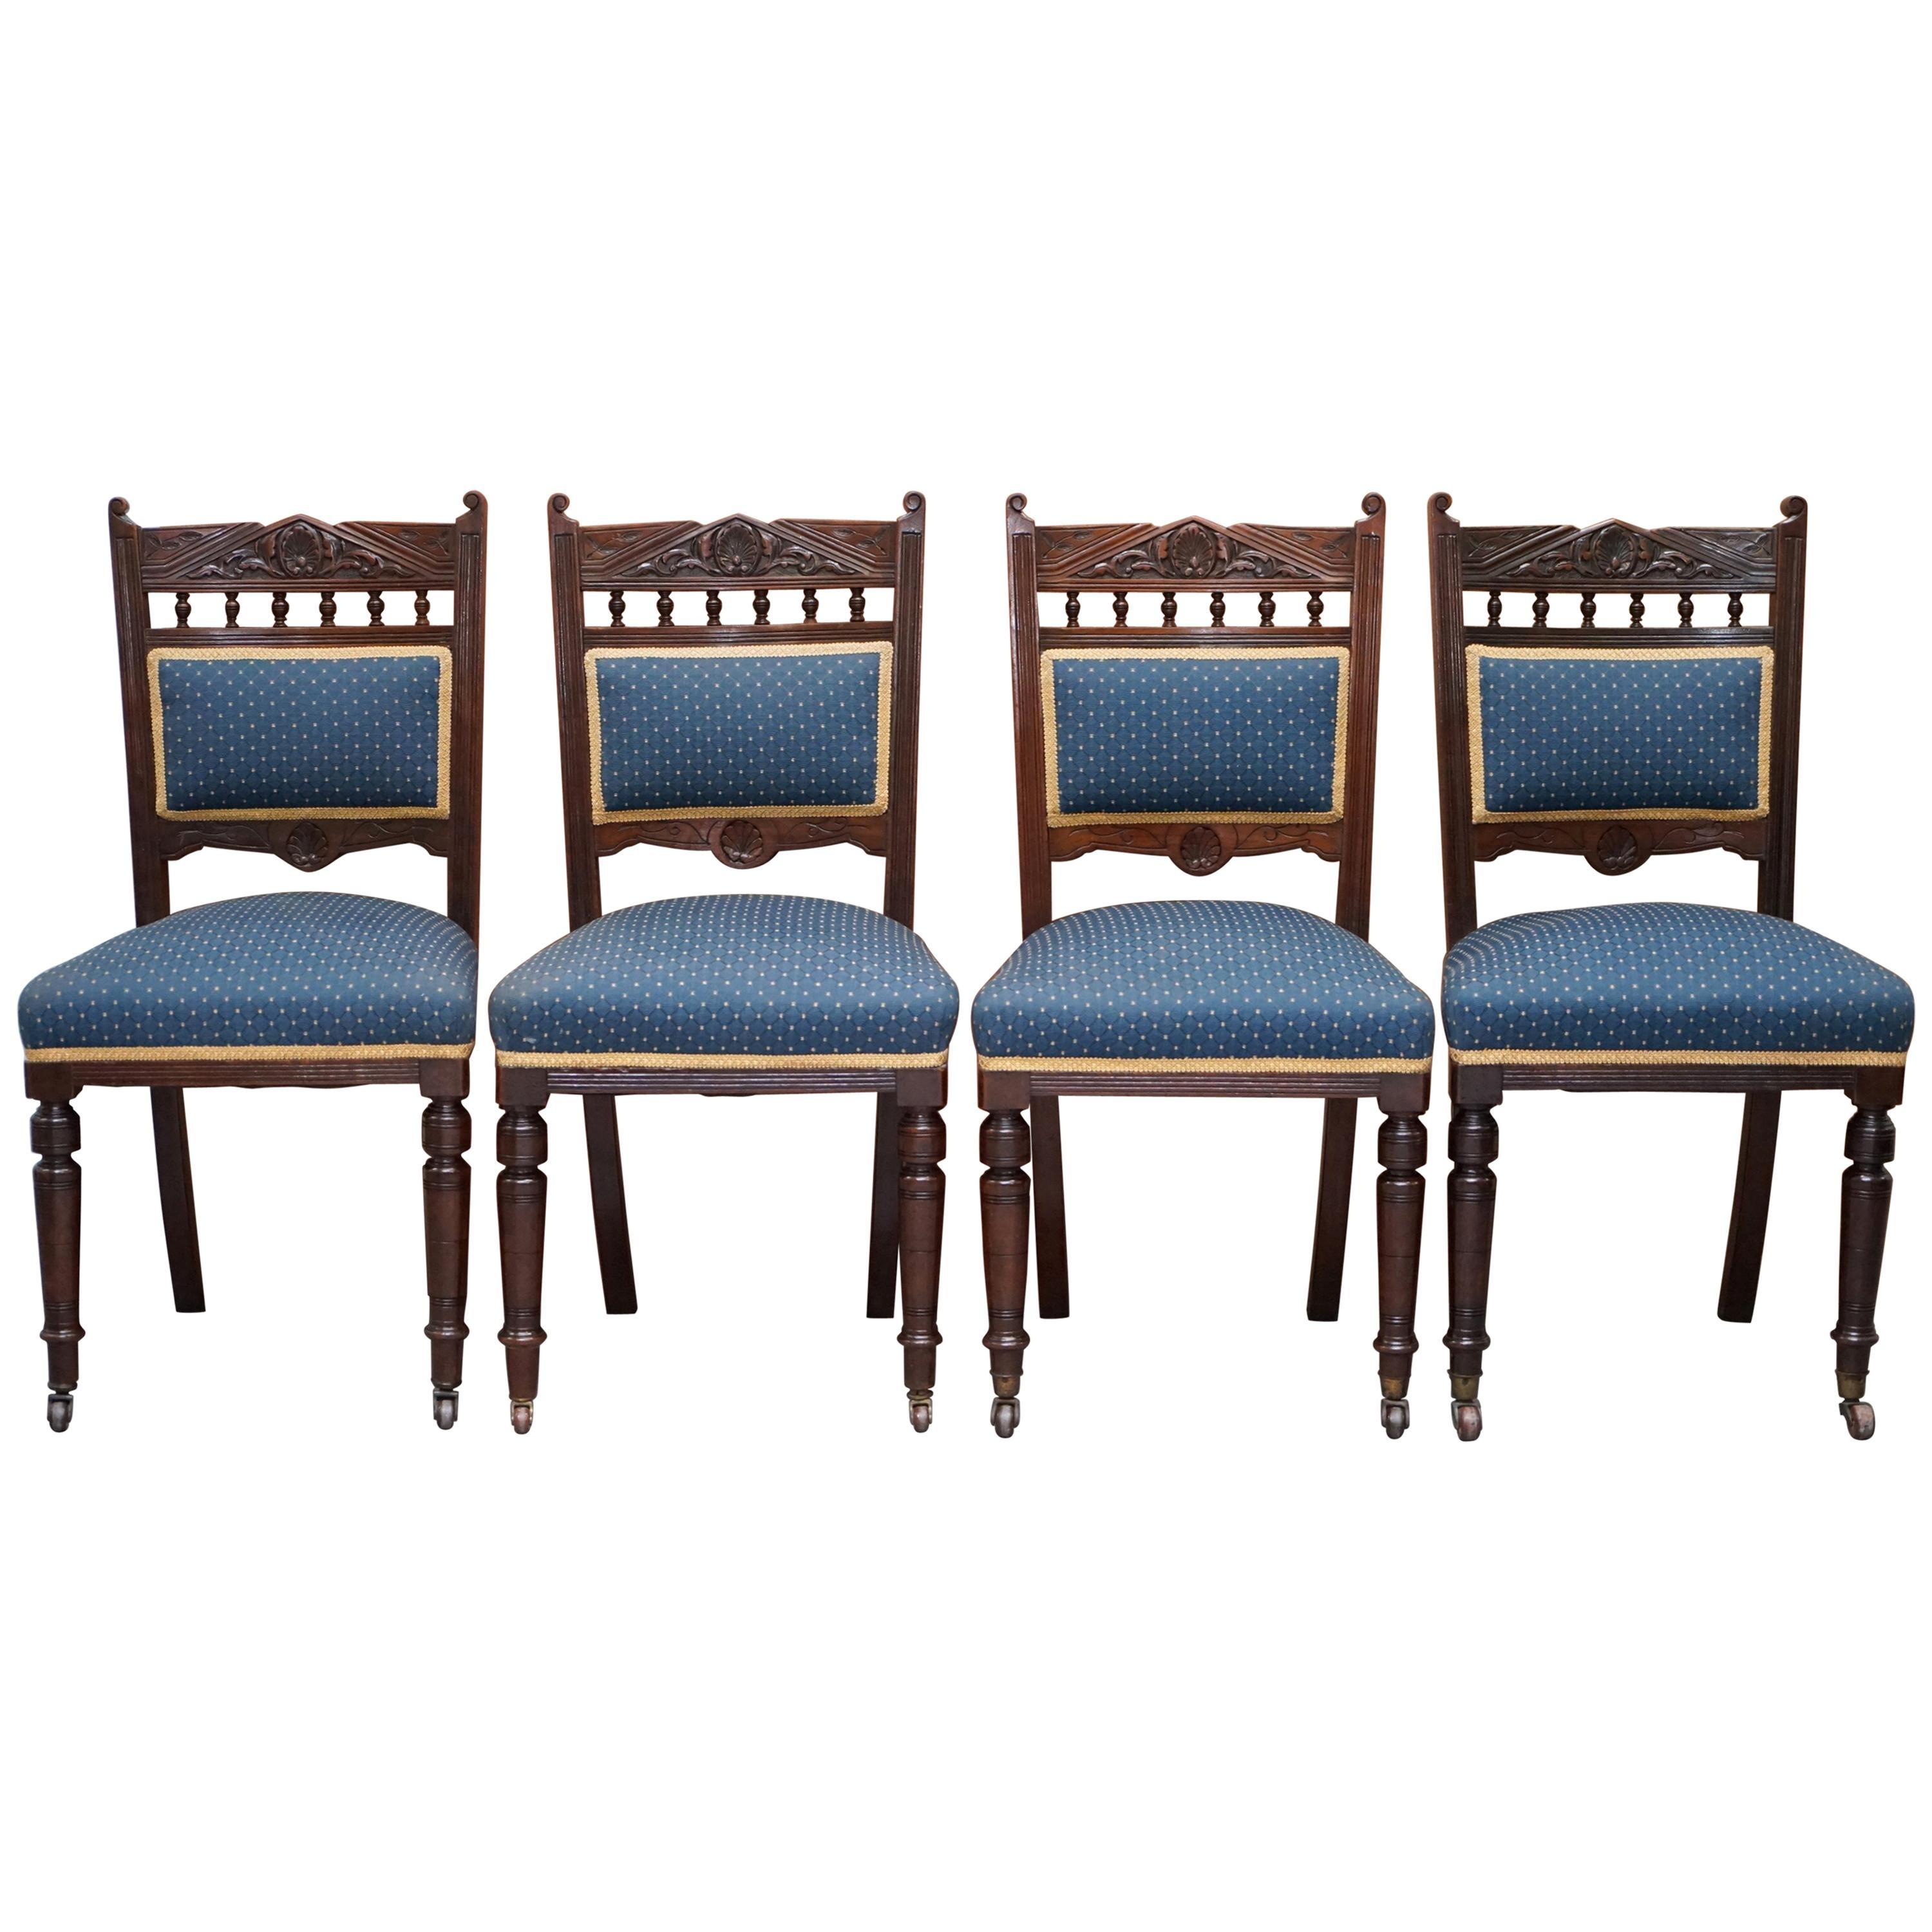 Stunning Suite of Original Solid Hardwood Victorian Maple & Co. Dining Chairs